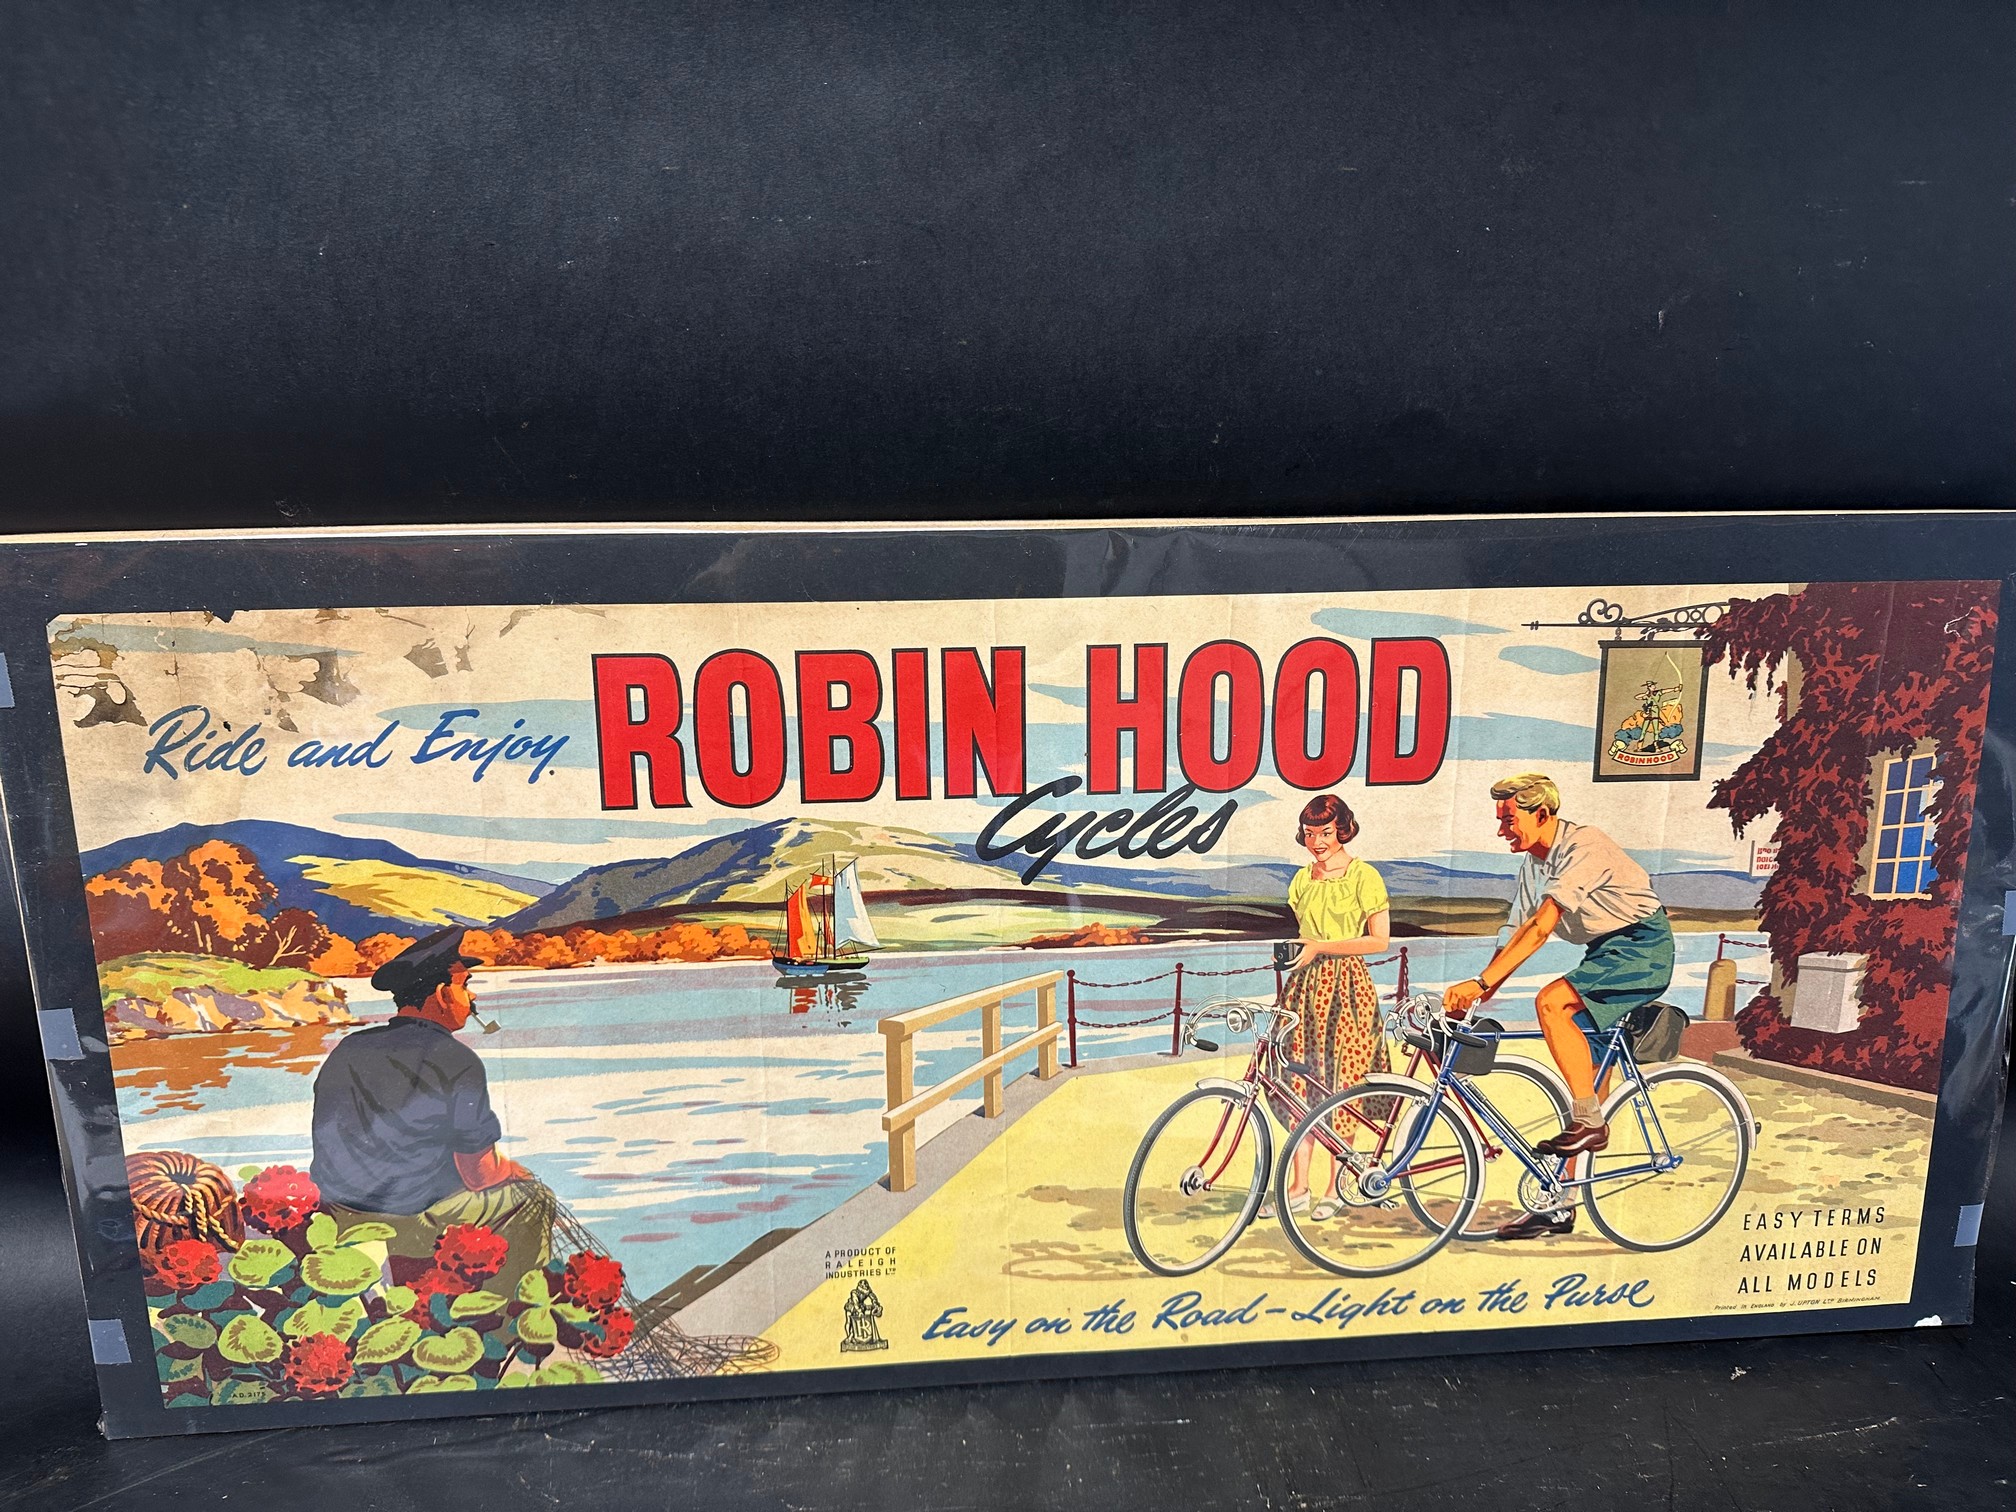 A poster advertising Robin Hood Cycles 'Easy on Road - Light on the Purse', a product of Raleigh